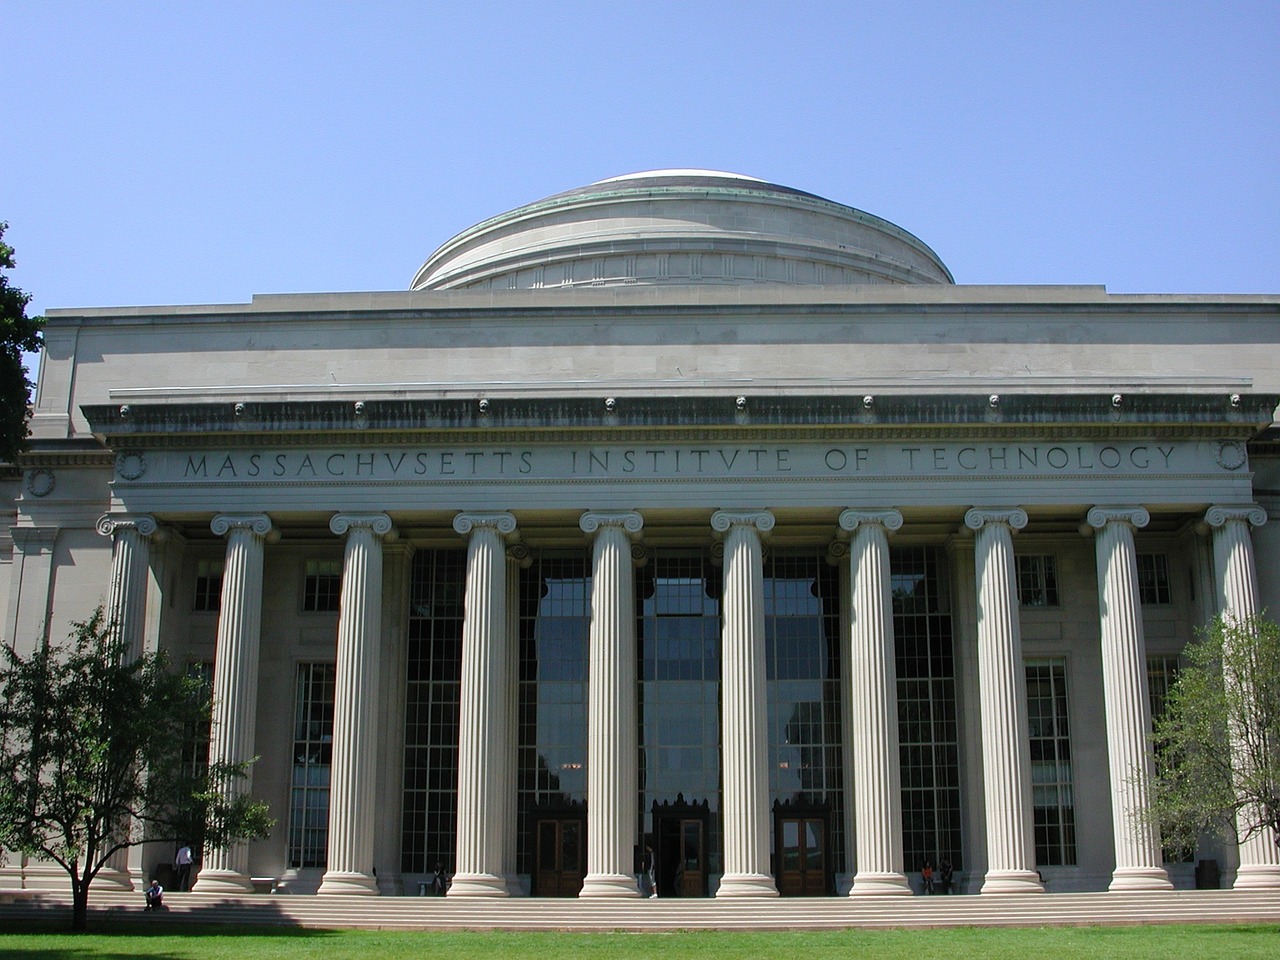 MIT is located in Boston